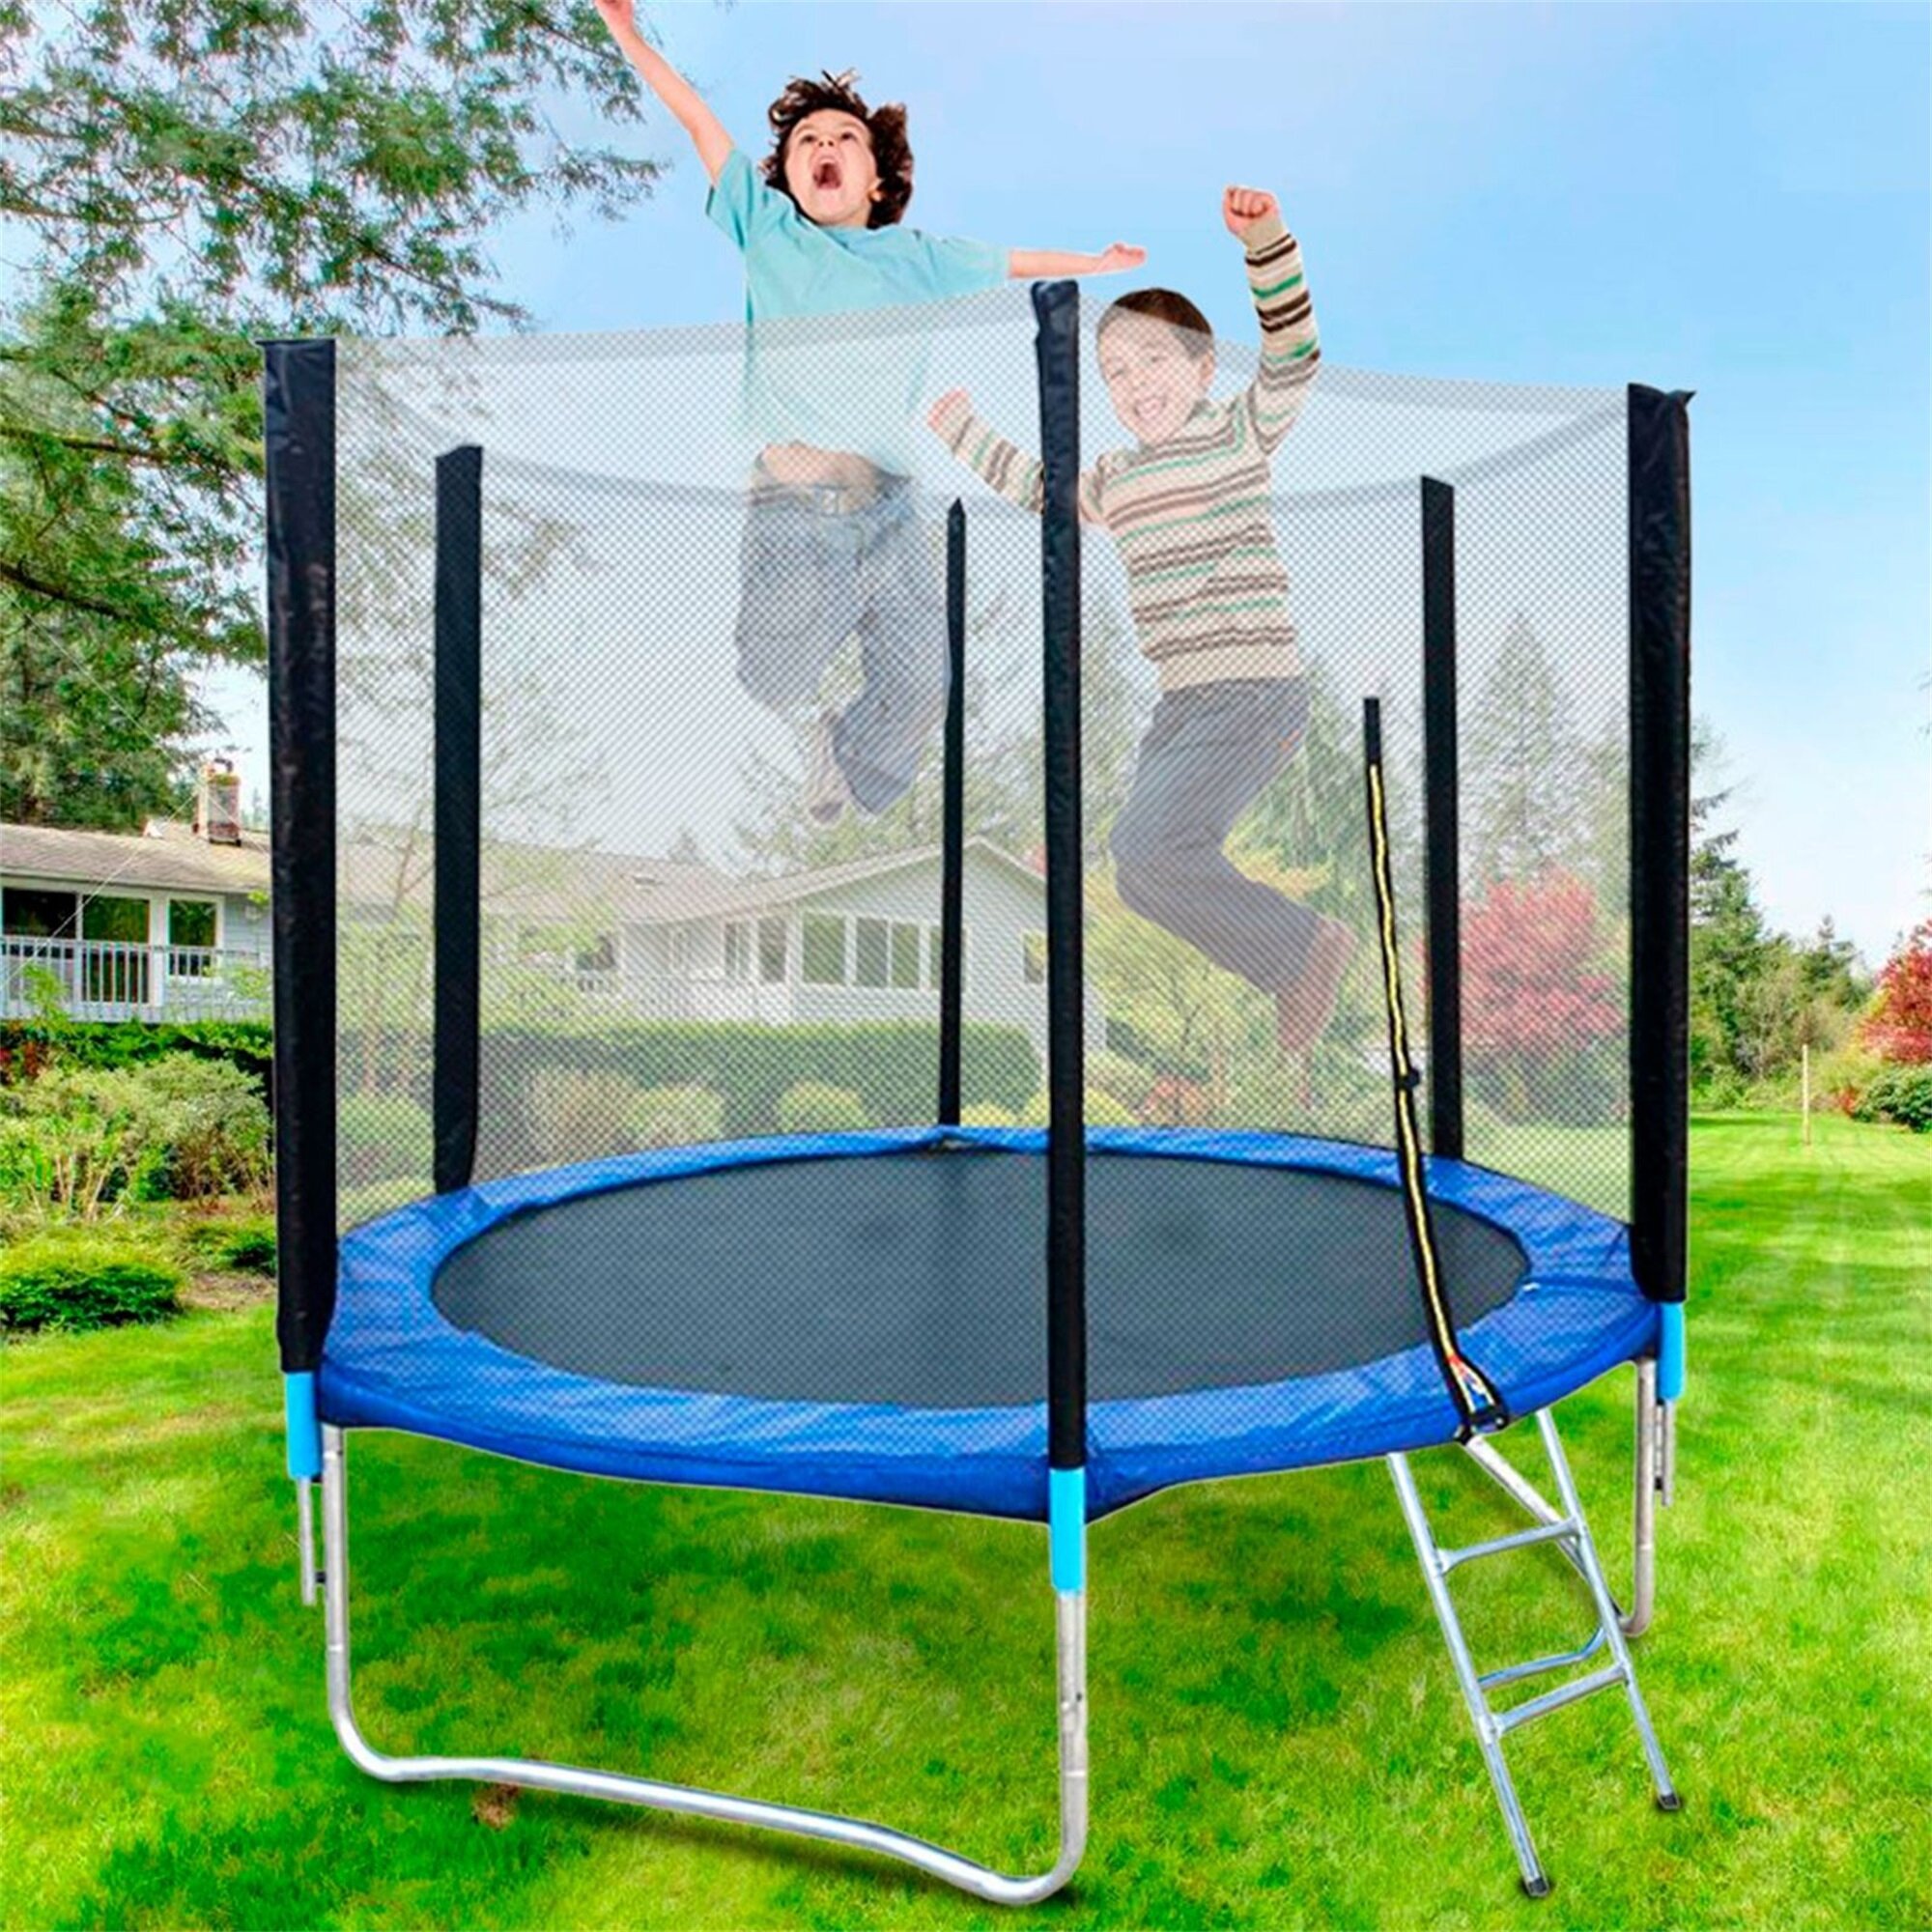 Details about   12 FT Trampoline With Enclosure Net Jumping Mat And Spring Cover Padding 